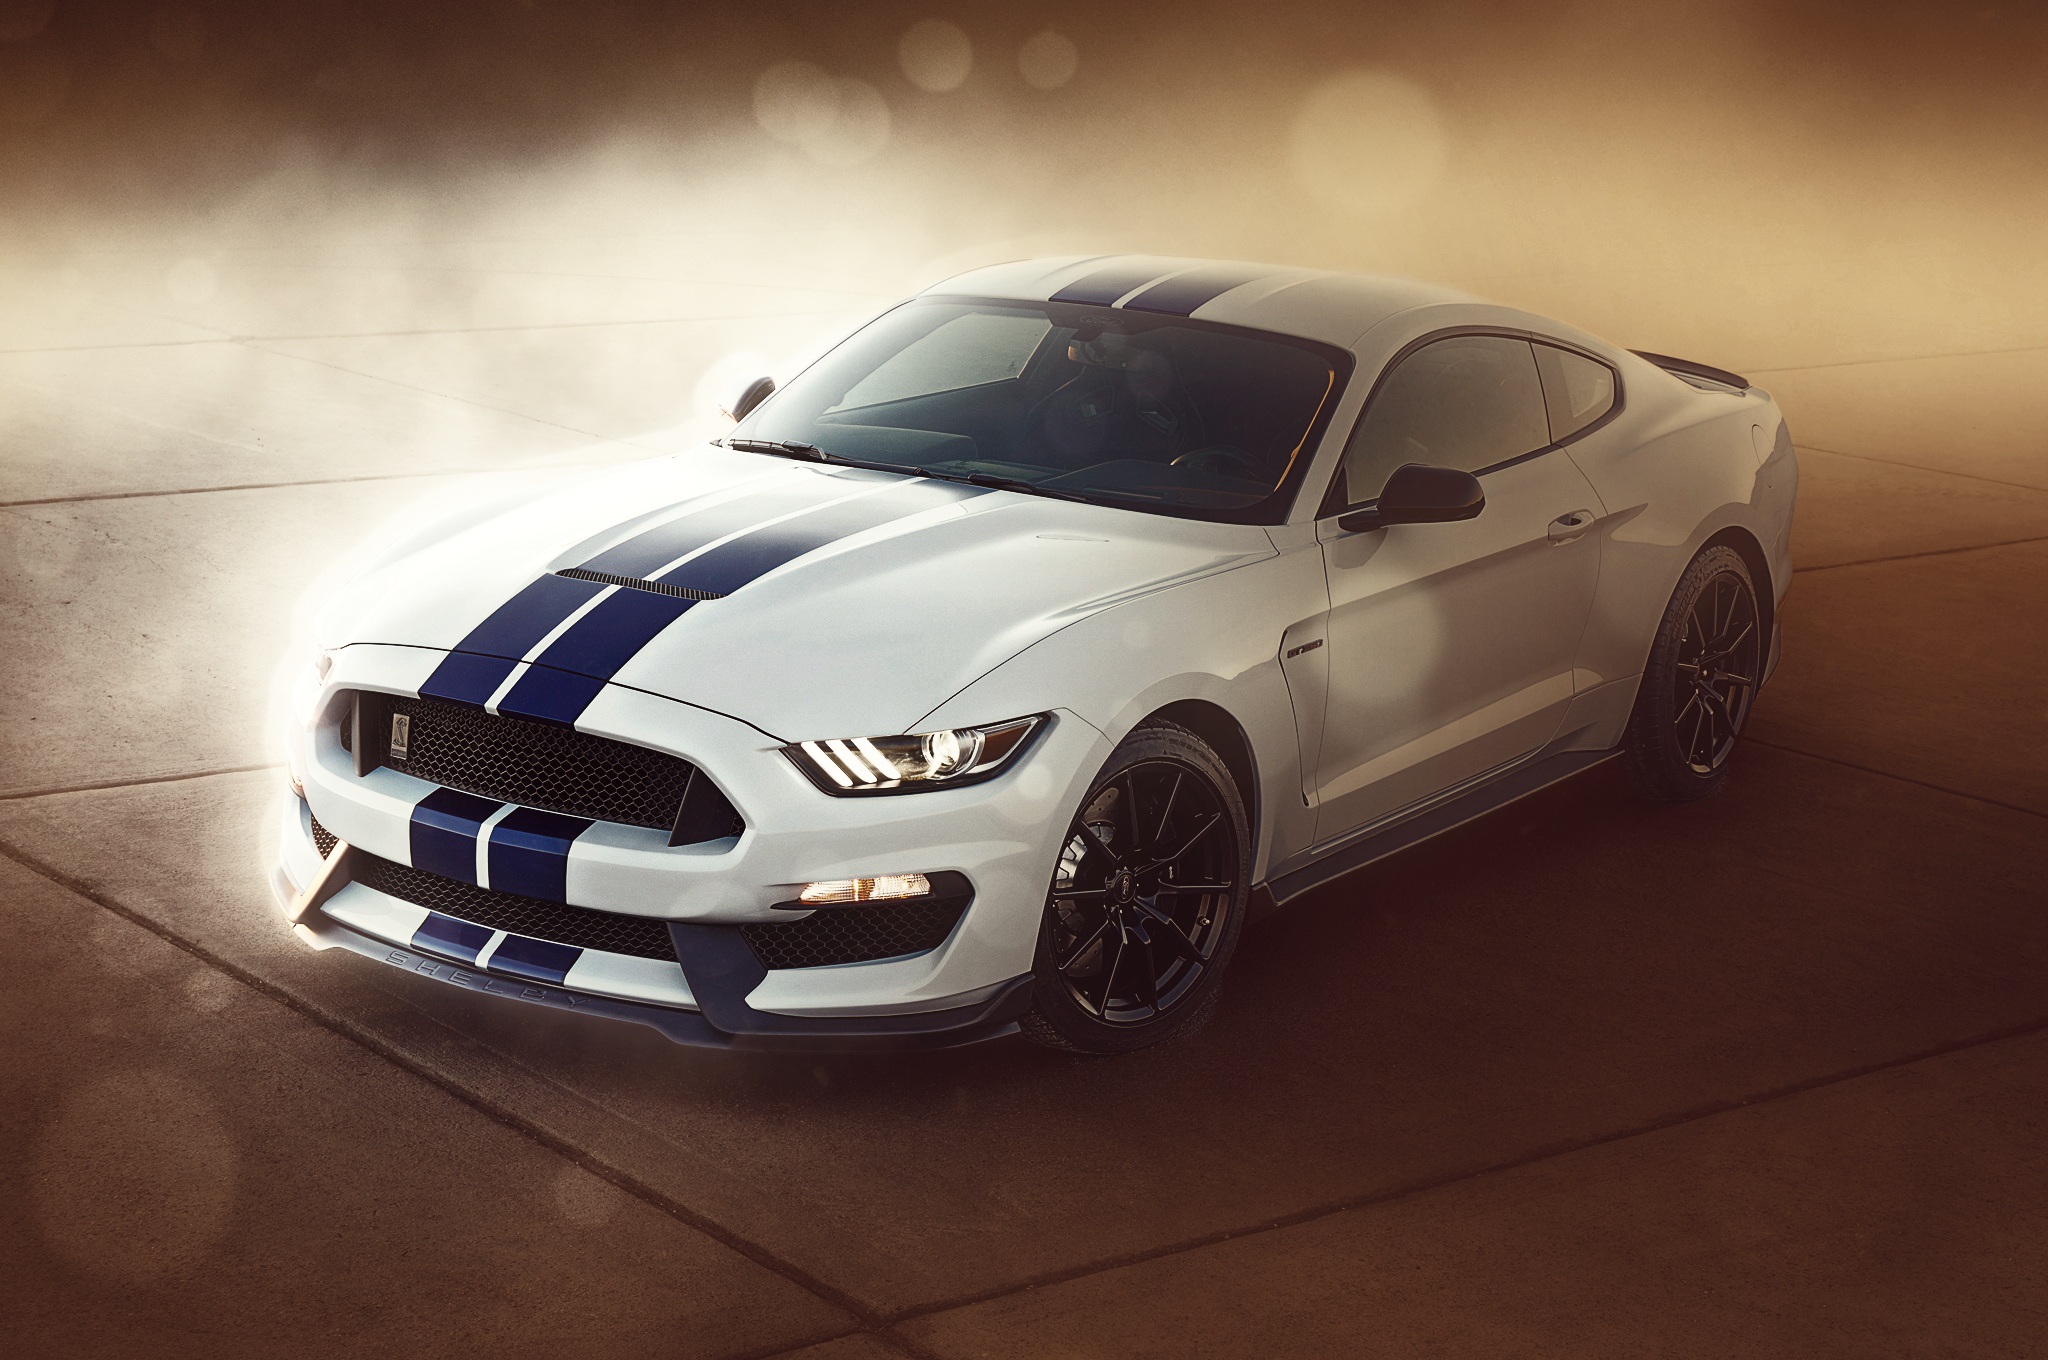 Ford Mustang Shelby Car White Car Ford Ford Mustang Muscle Car Ford Mustang Shelby GT350 2048x1360